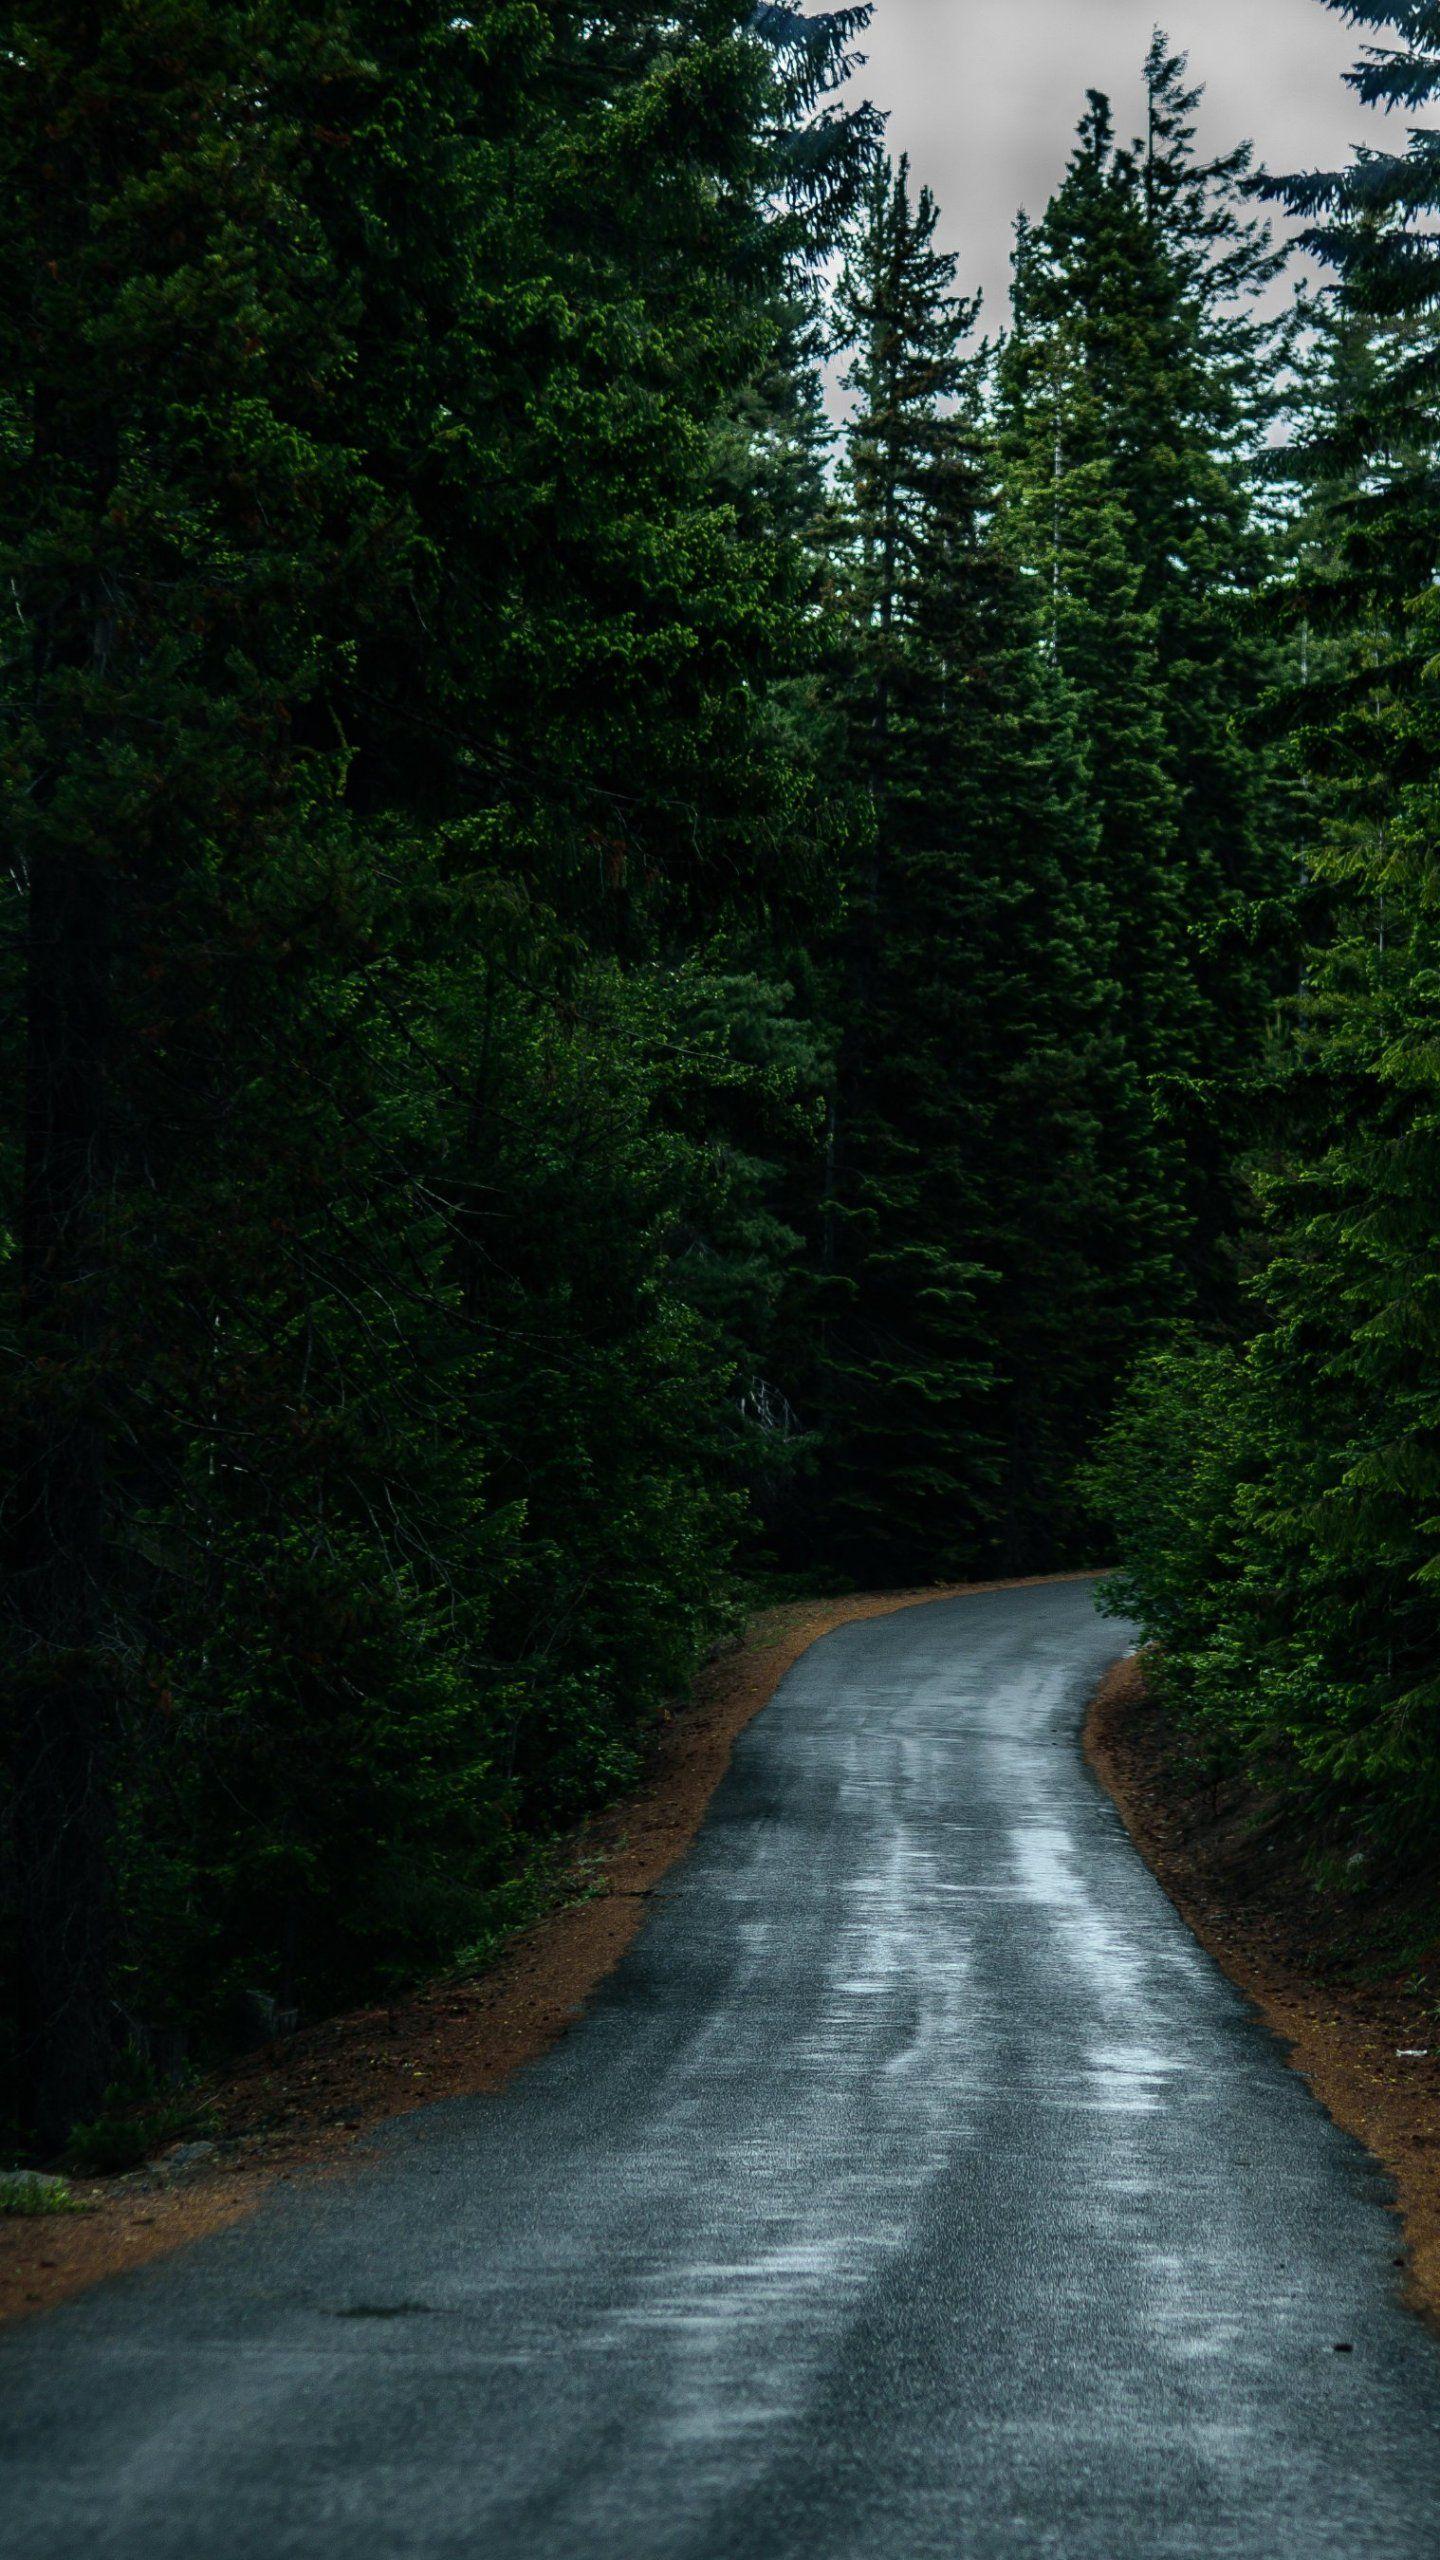 Road Through Forest Wallpaper, Android & Desktop